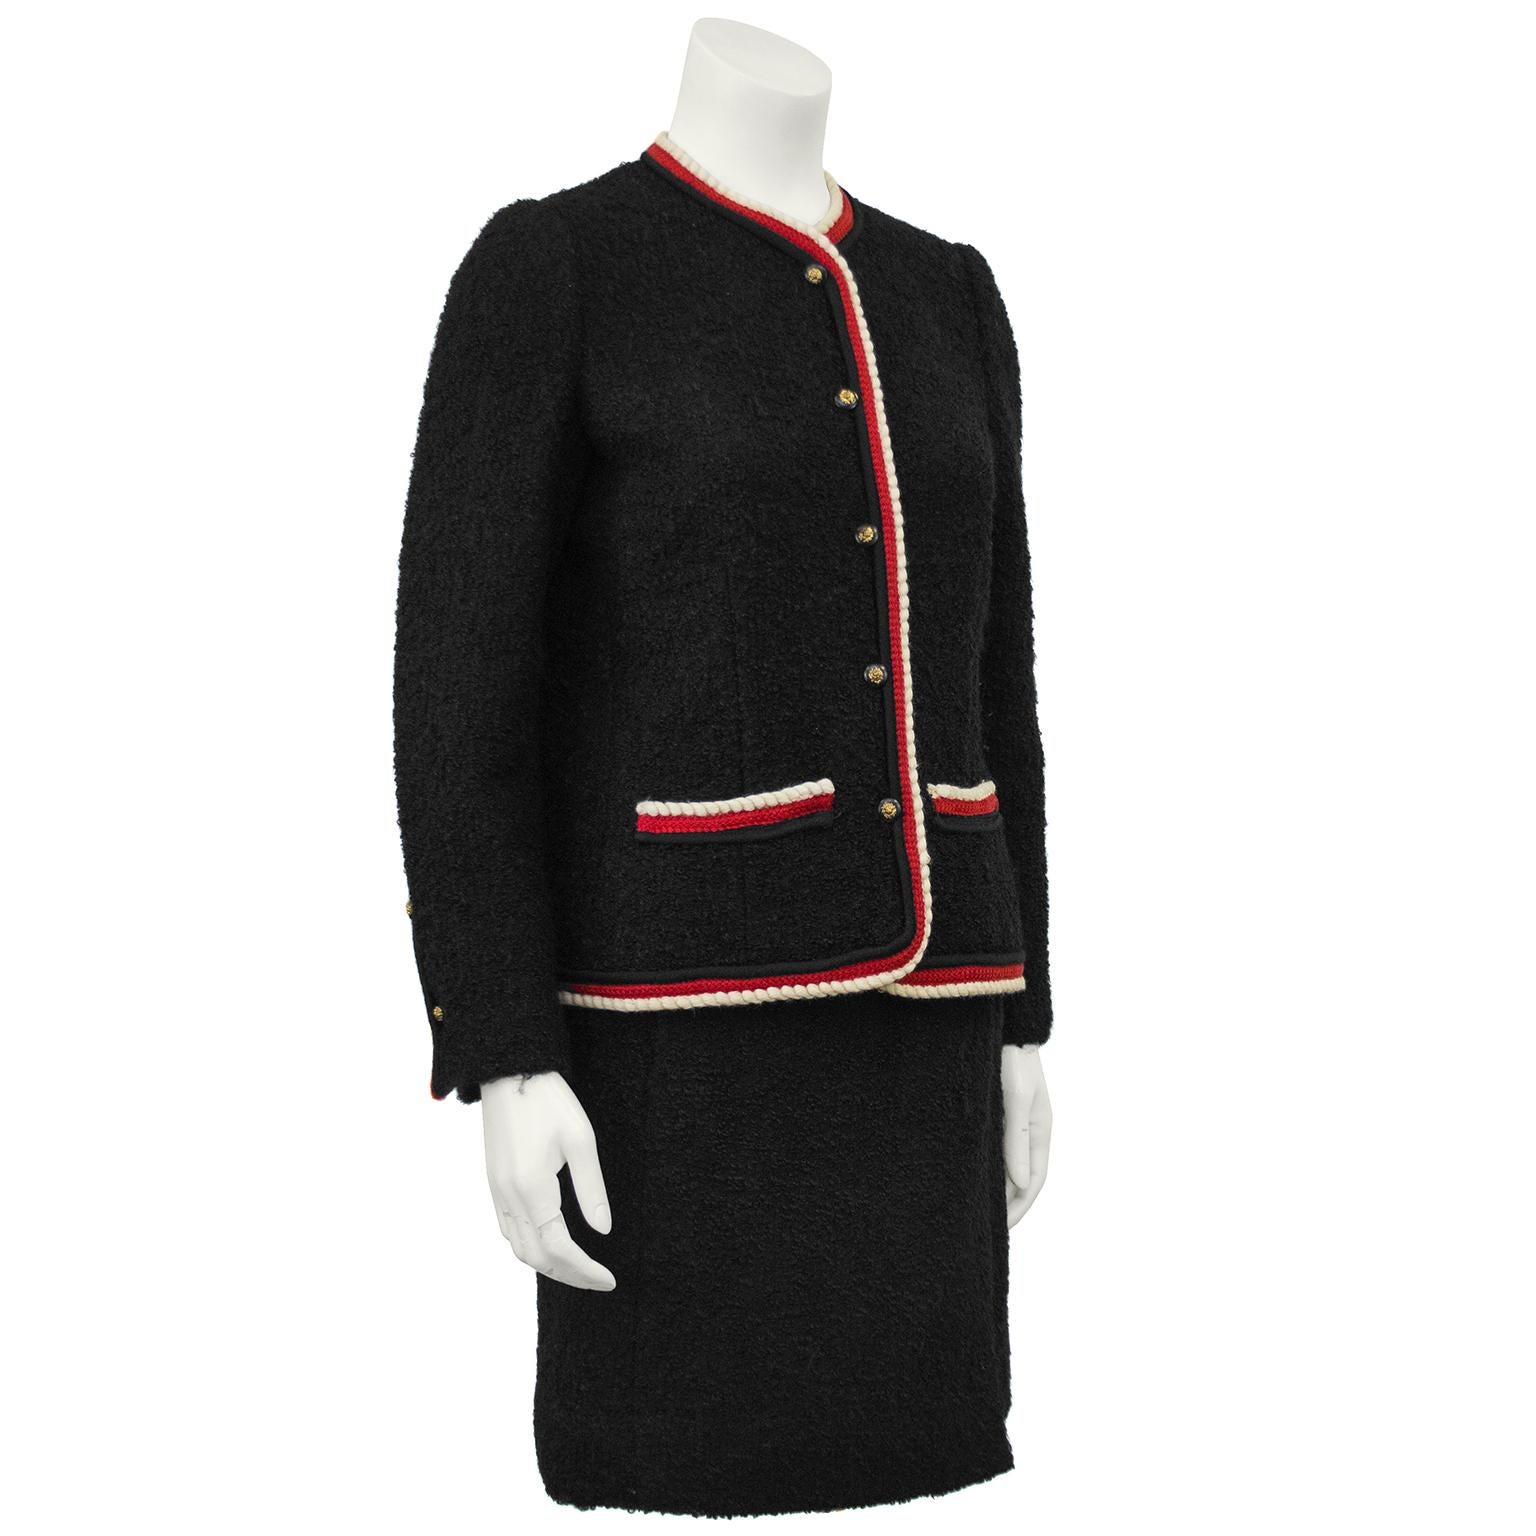 The very best example of Chanel's classic ladies suiting. Black wool boucle with red and cream trim and the most appealing black buttons with lions head in gilded metal. Simple, tasteful and a lifelong friend. Every closet deserves this timeless